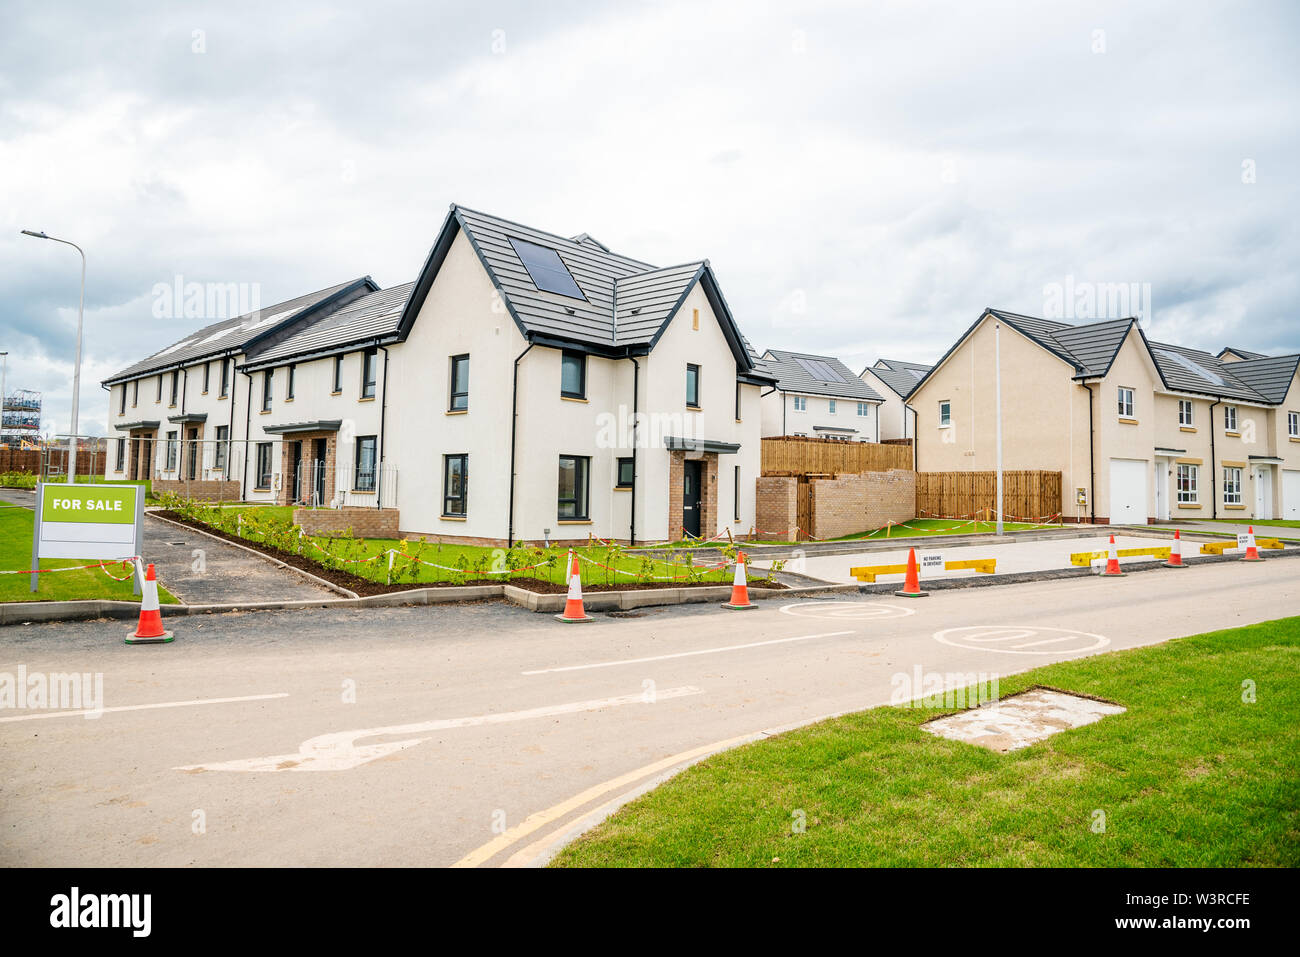 Newly built energy efficient houses with solar panels on the roof for sale in a housing development in Scotland on acloudy spring day Stock Photo